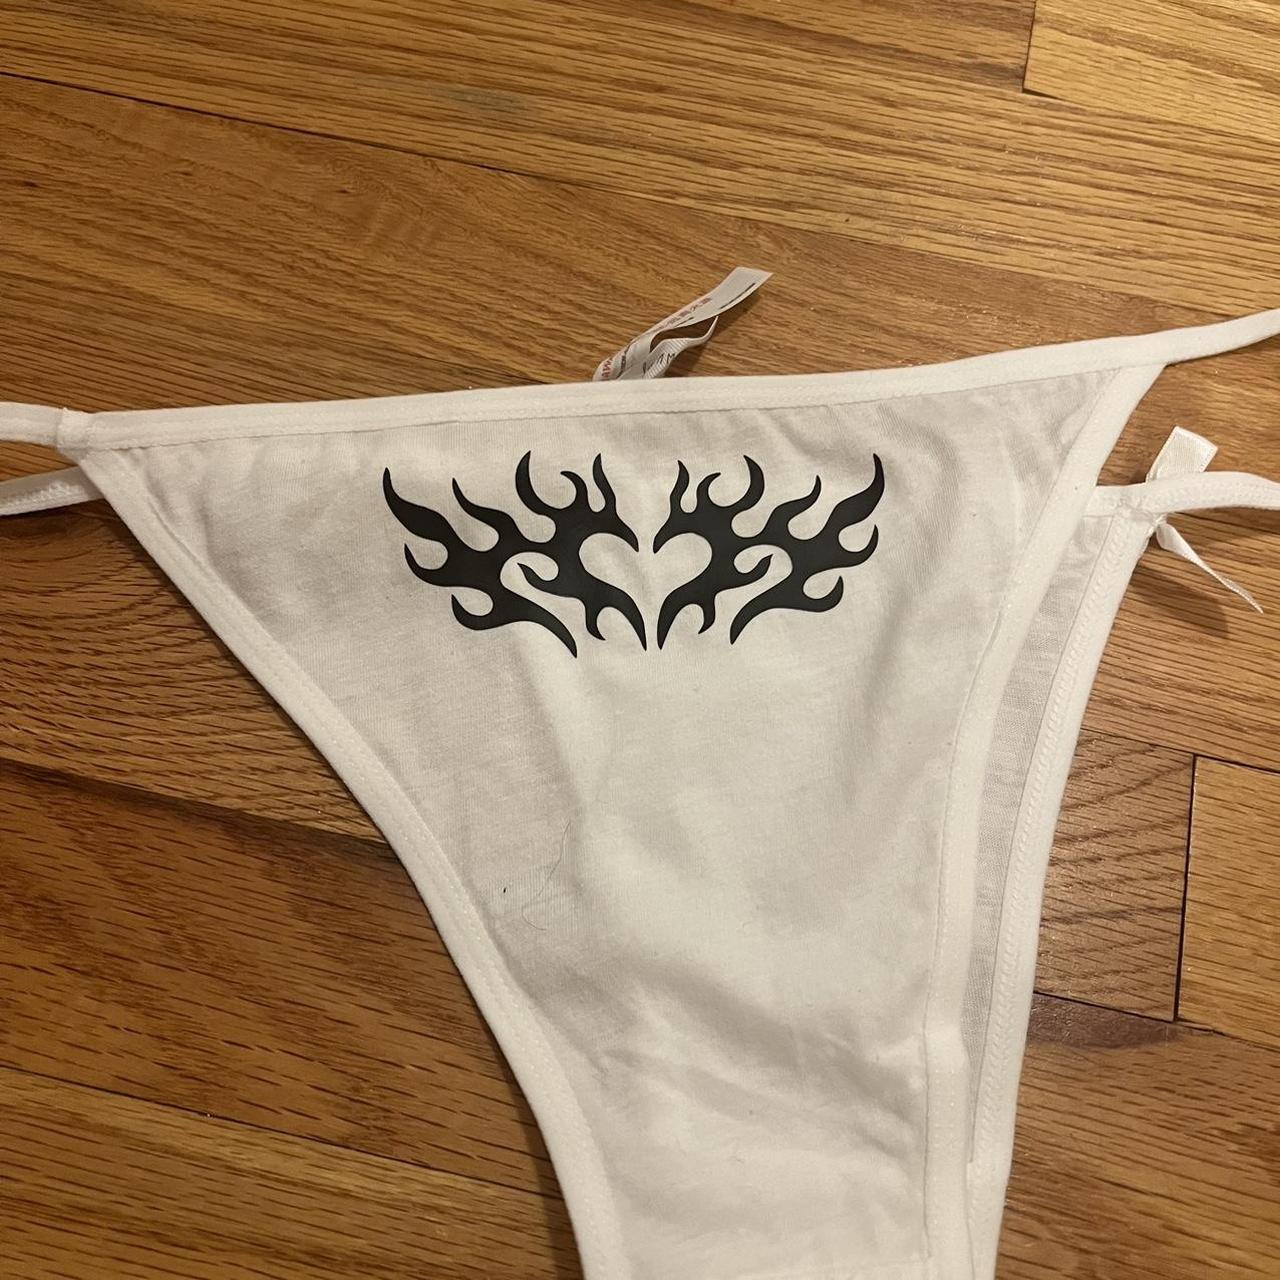 Coquette panty Lana Del Rey inspired 🎀 Upcycled - Depop